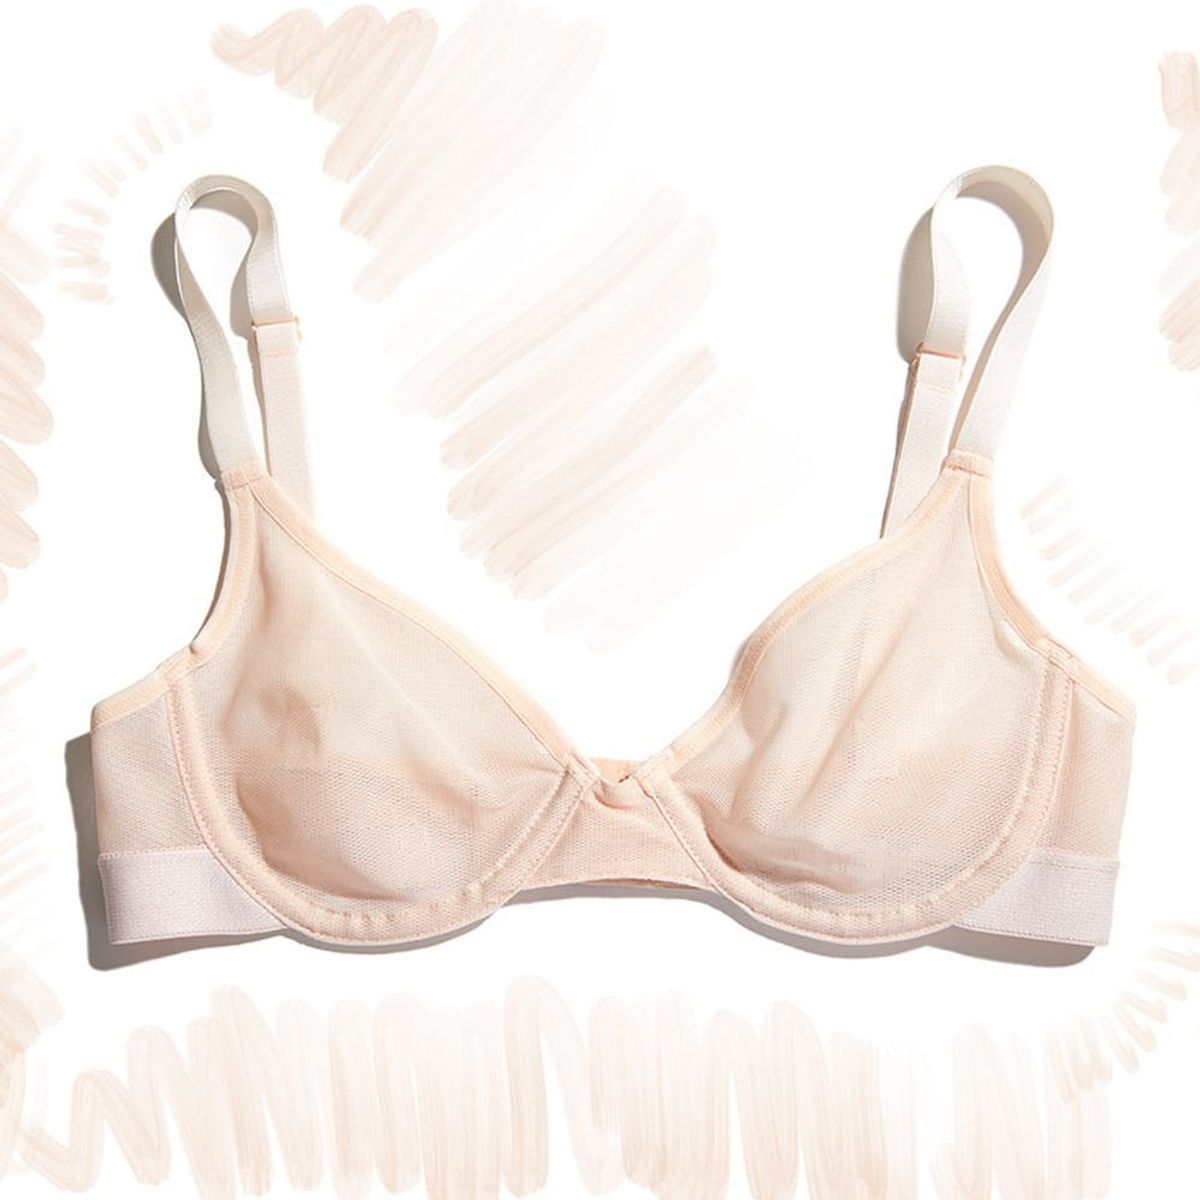 We Tried a Bra: An Unlined, Everyday Bra for Biggish Boobs